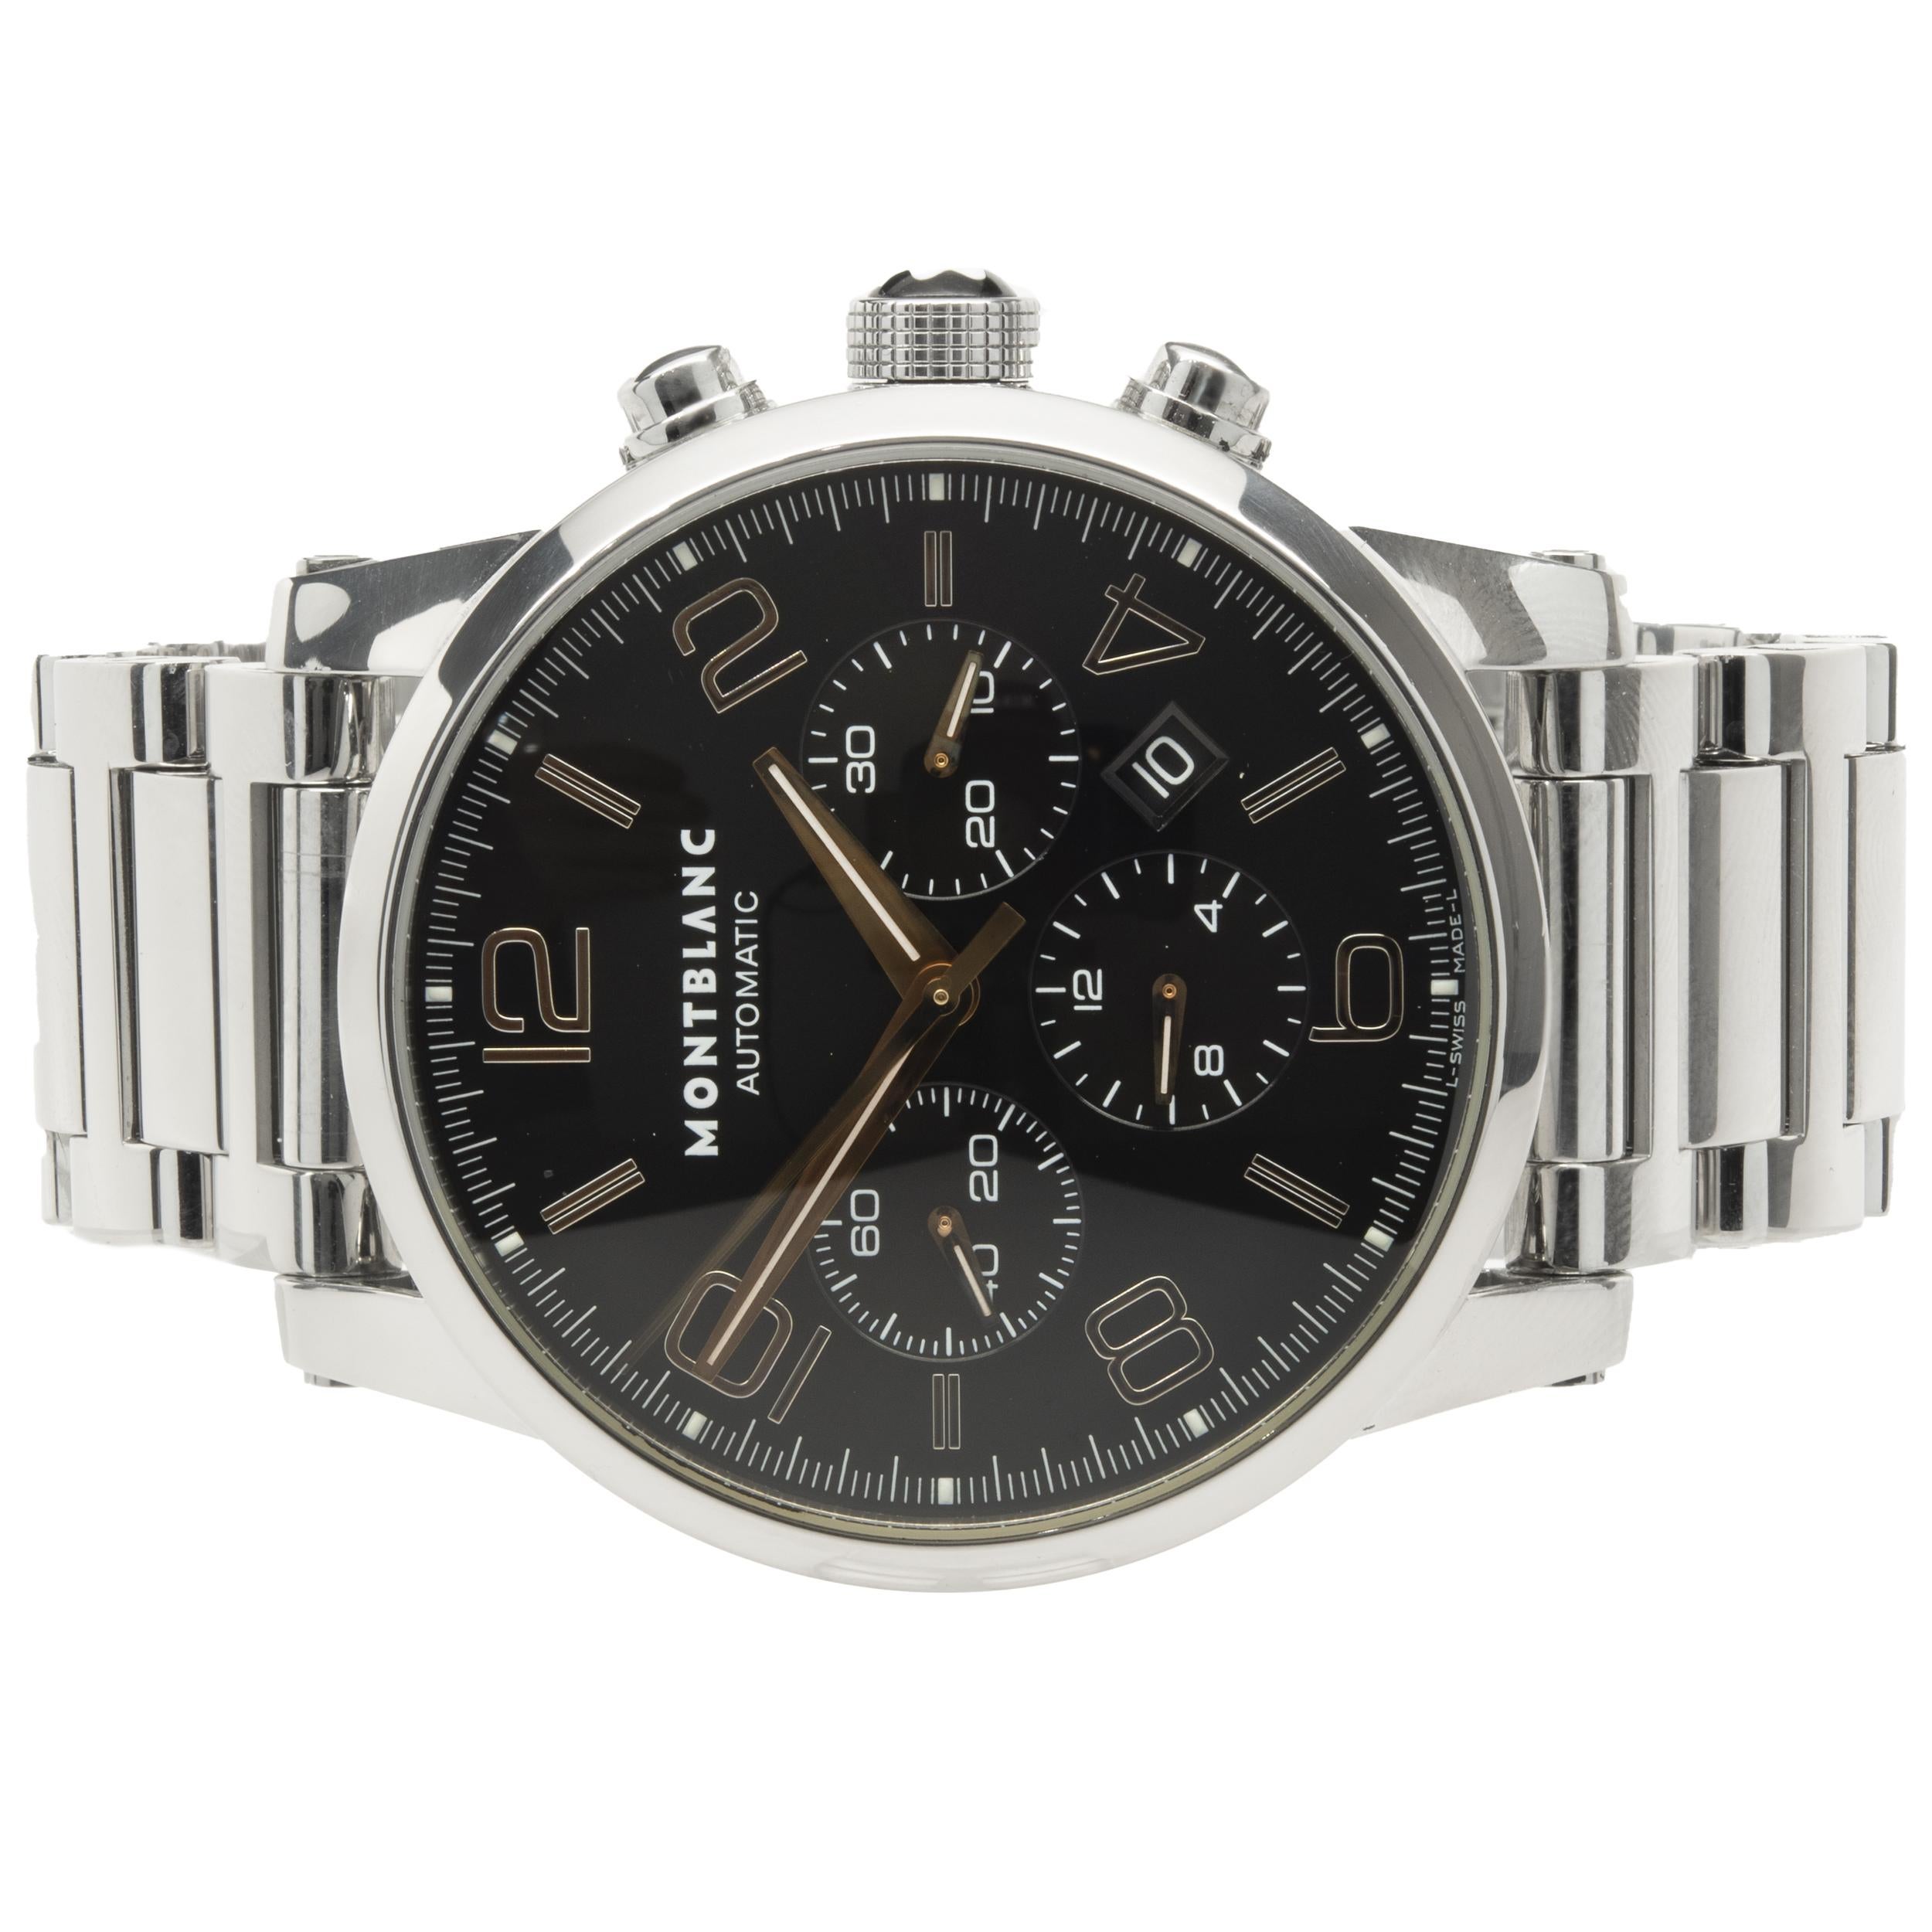 Movement: automatic
Function: hours, minutes, second, date, chronograph
Case: 43mm round stainless steel case, sapphire protective crystal, screw-down crown
Band: stainless steel bracelet, deployment butterfly clasp
Dial: black chronograph dial,